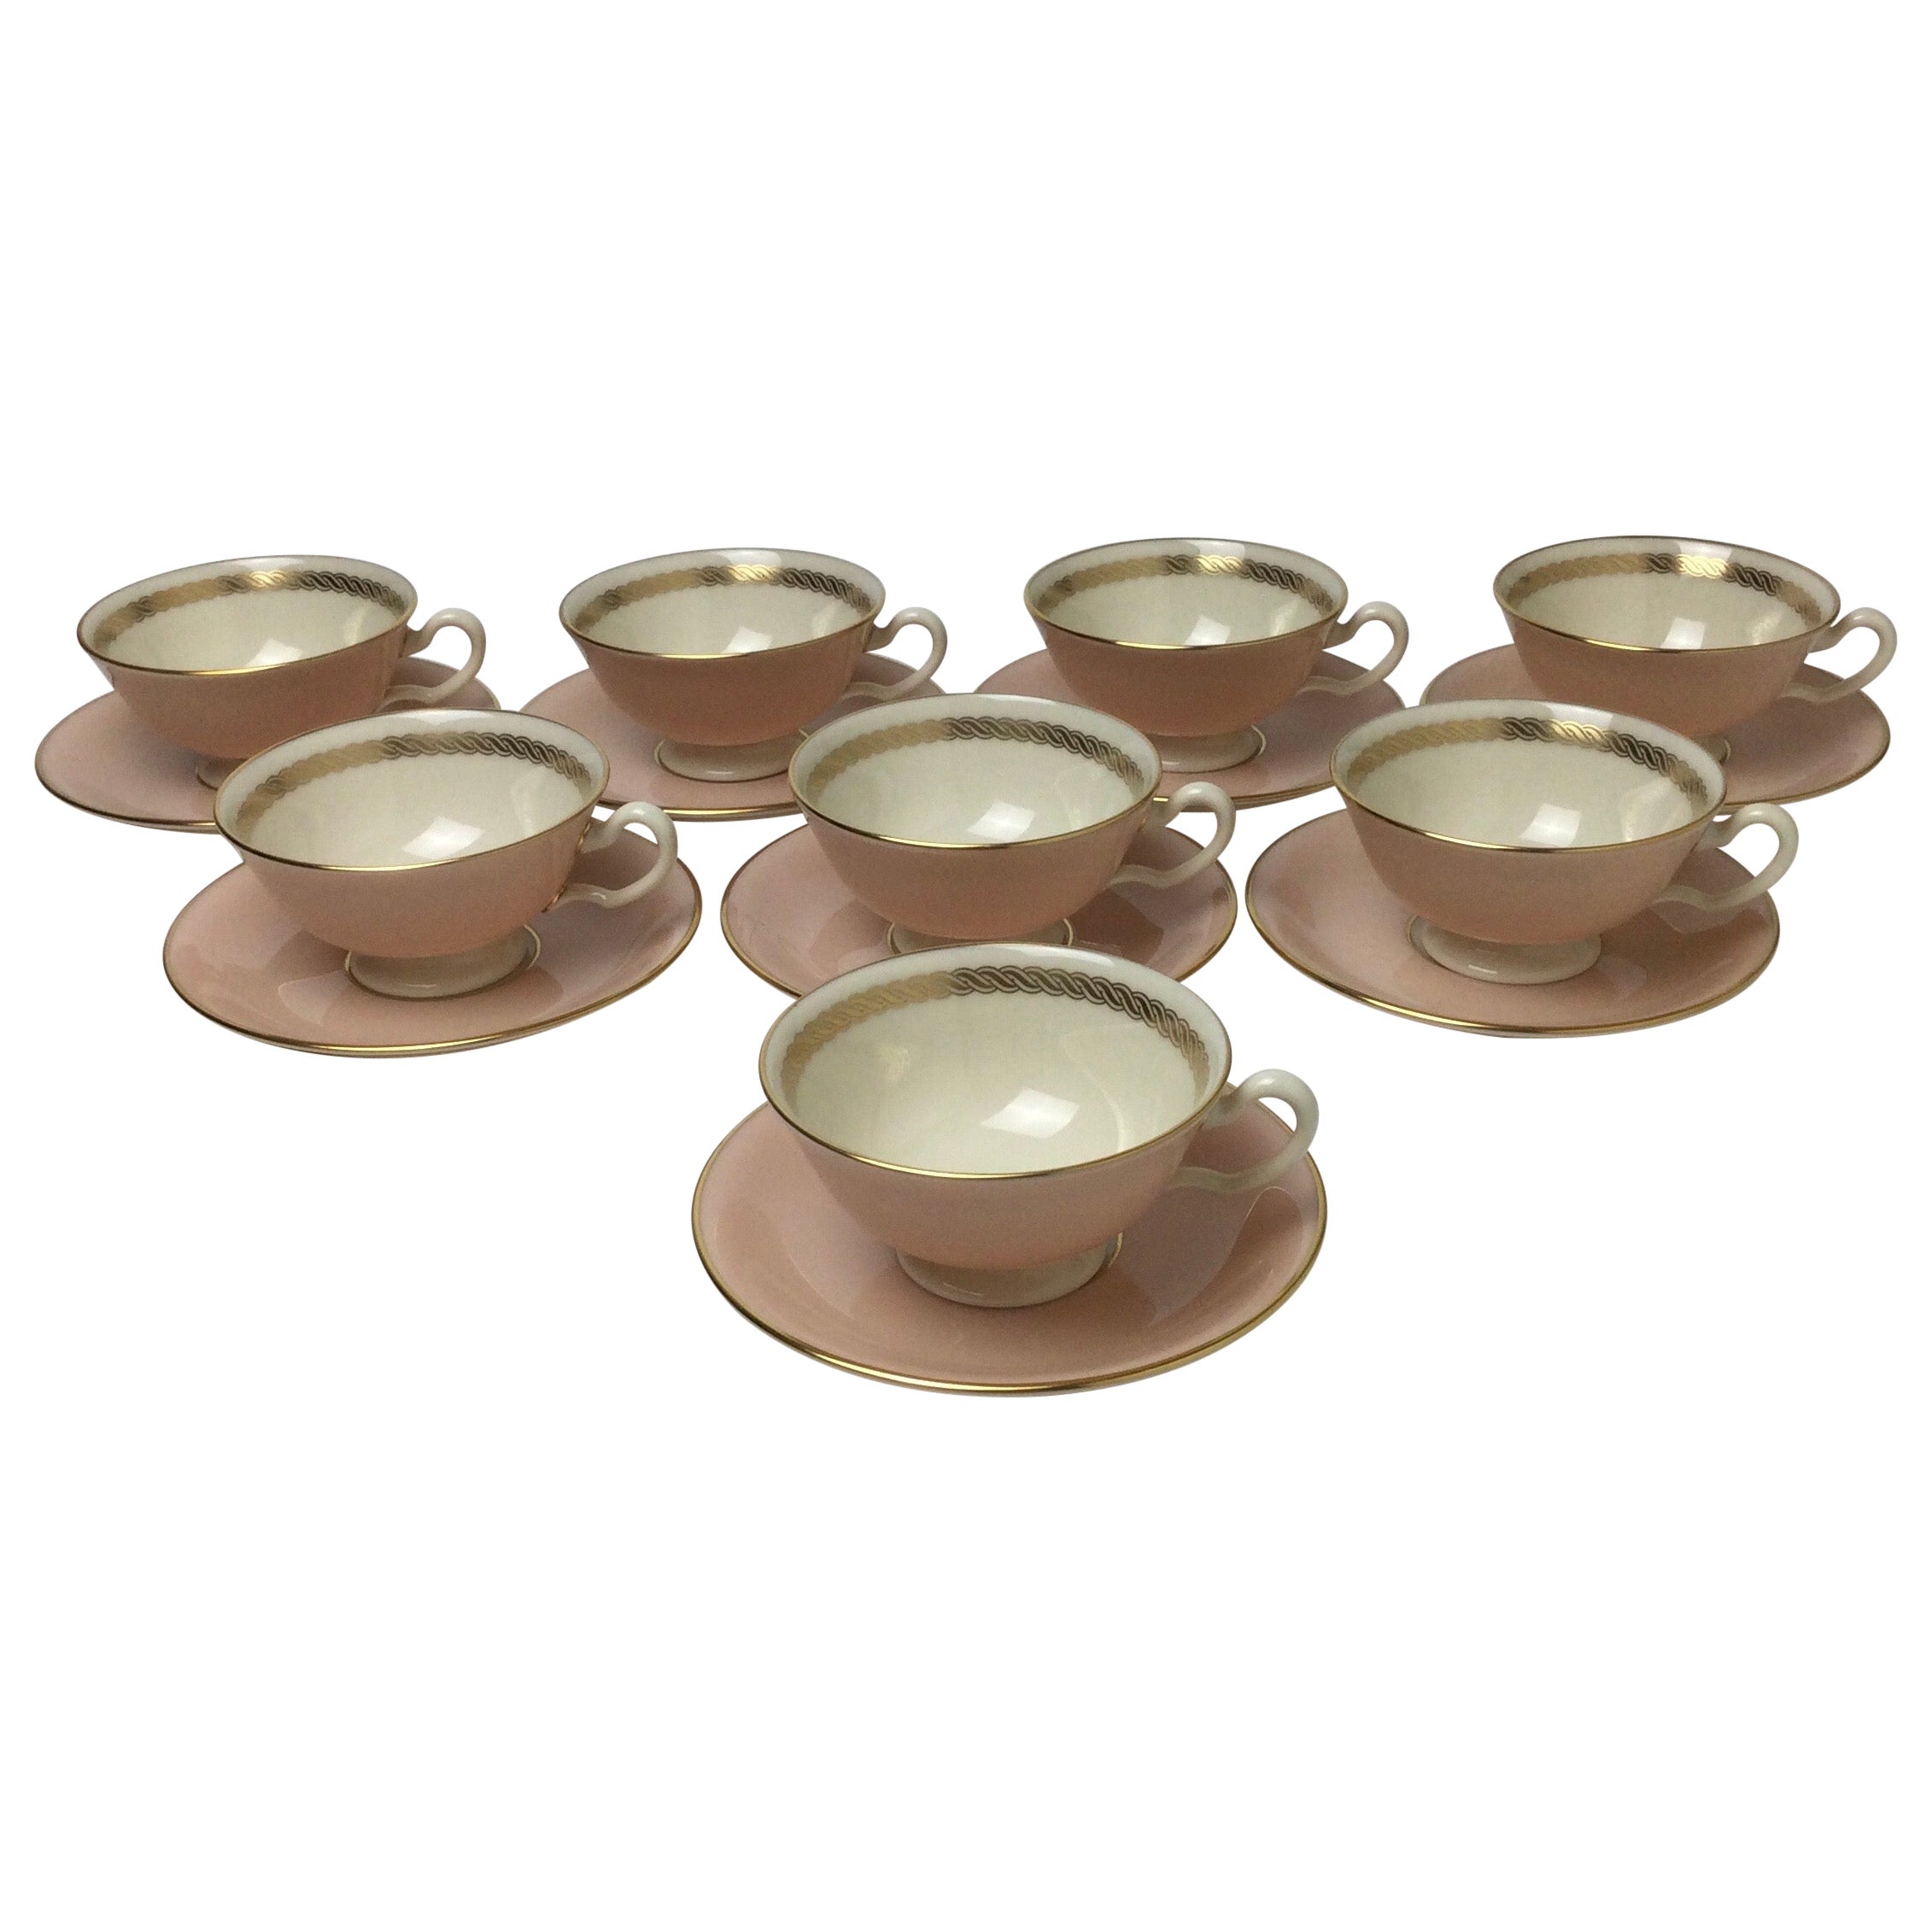 Set of 8 Lenox Caribbee Cups & Saucers with Pink and Gilt Borders